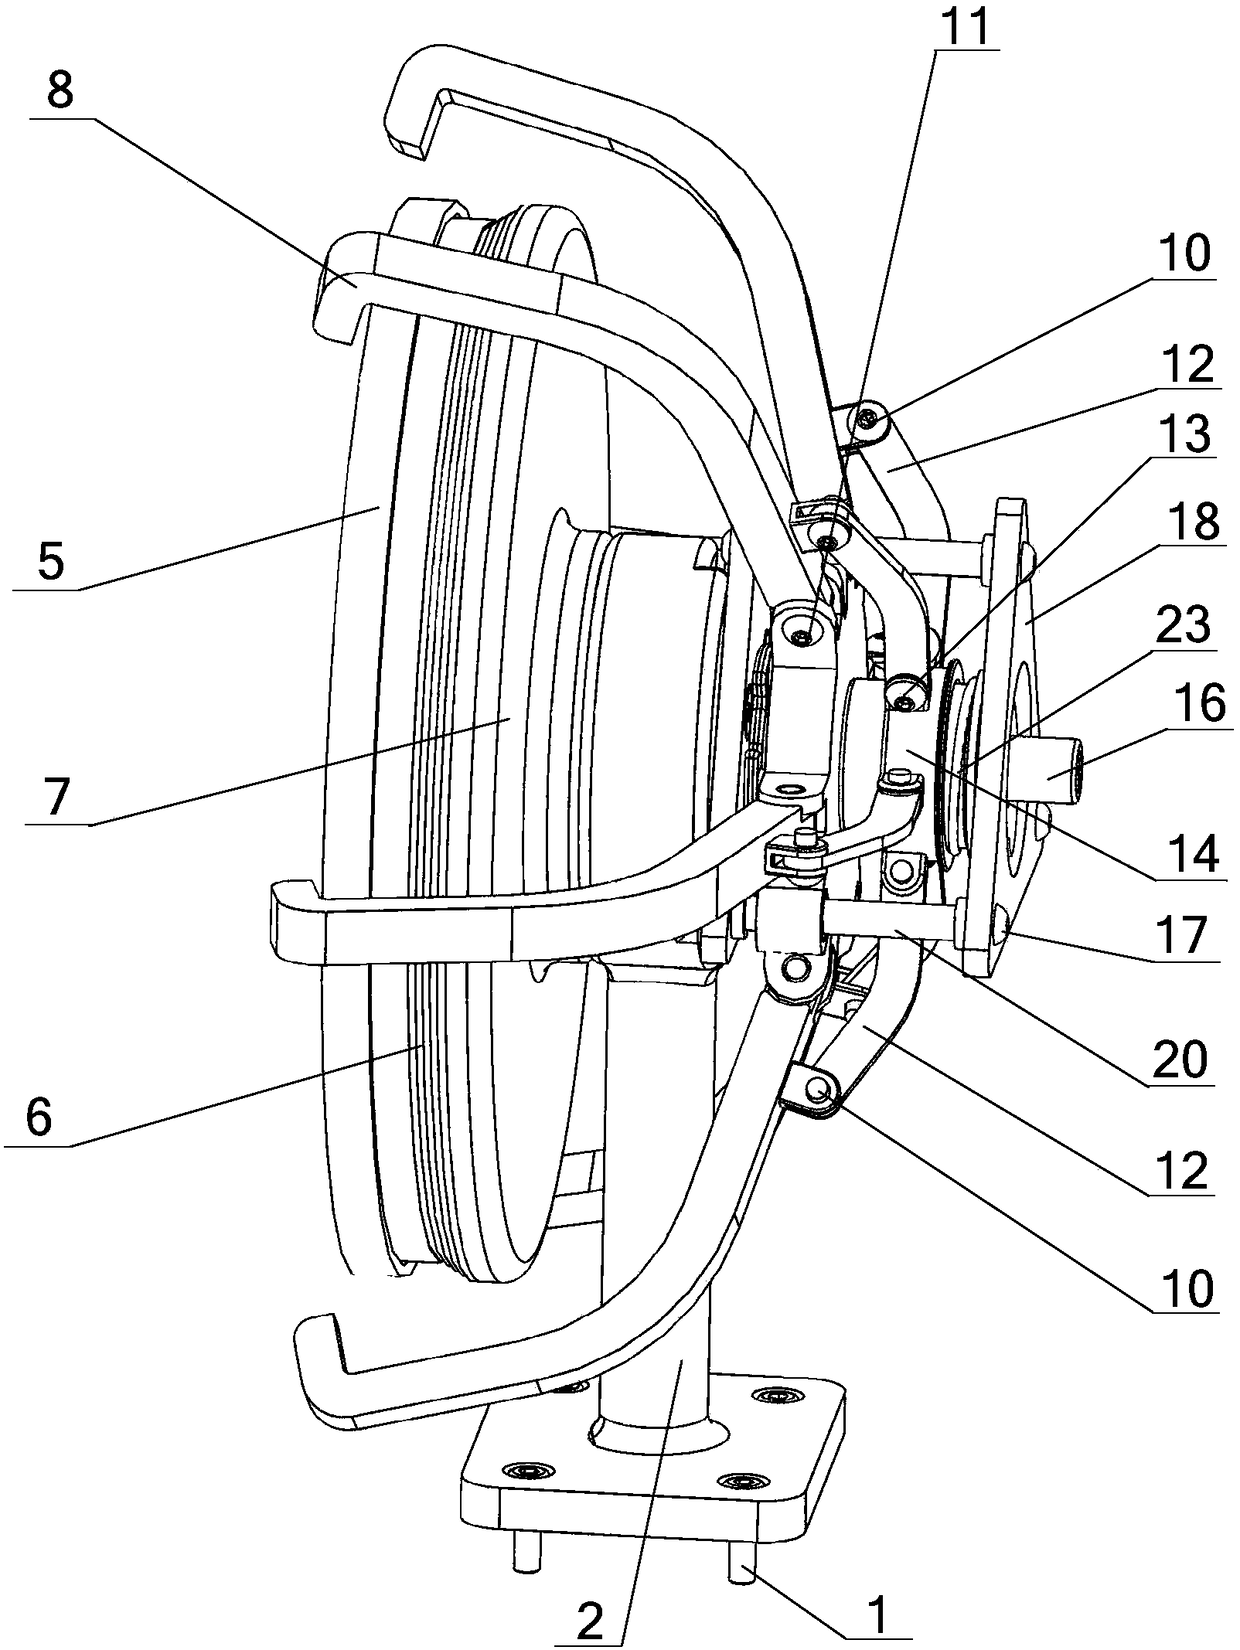 Rapid clamping device